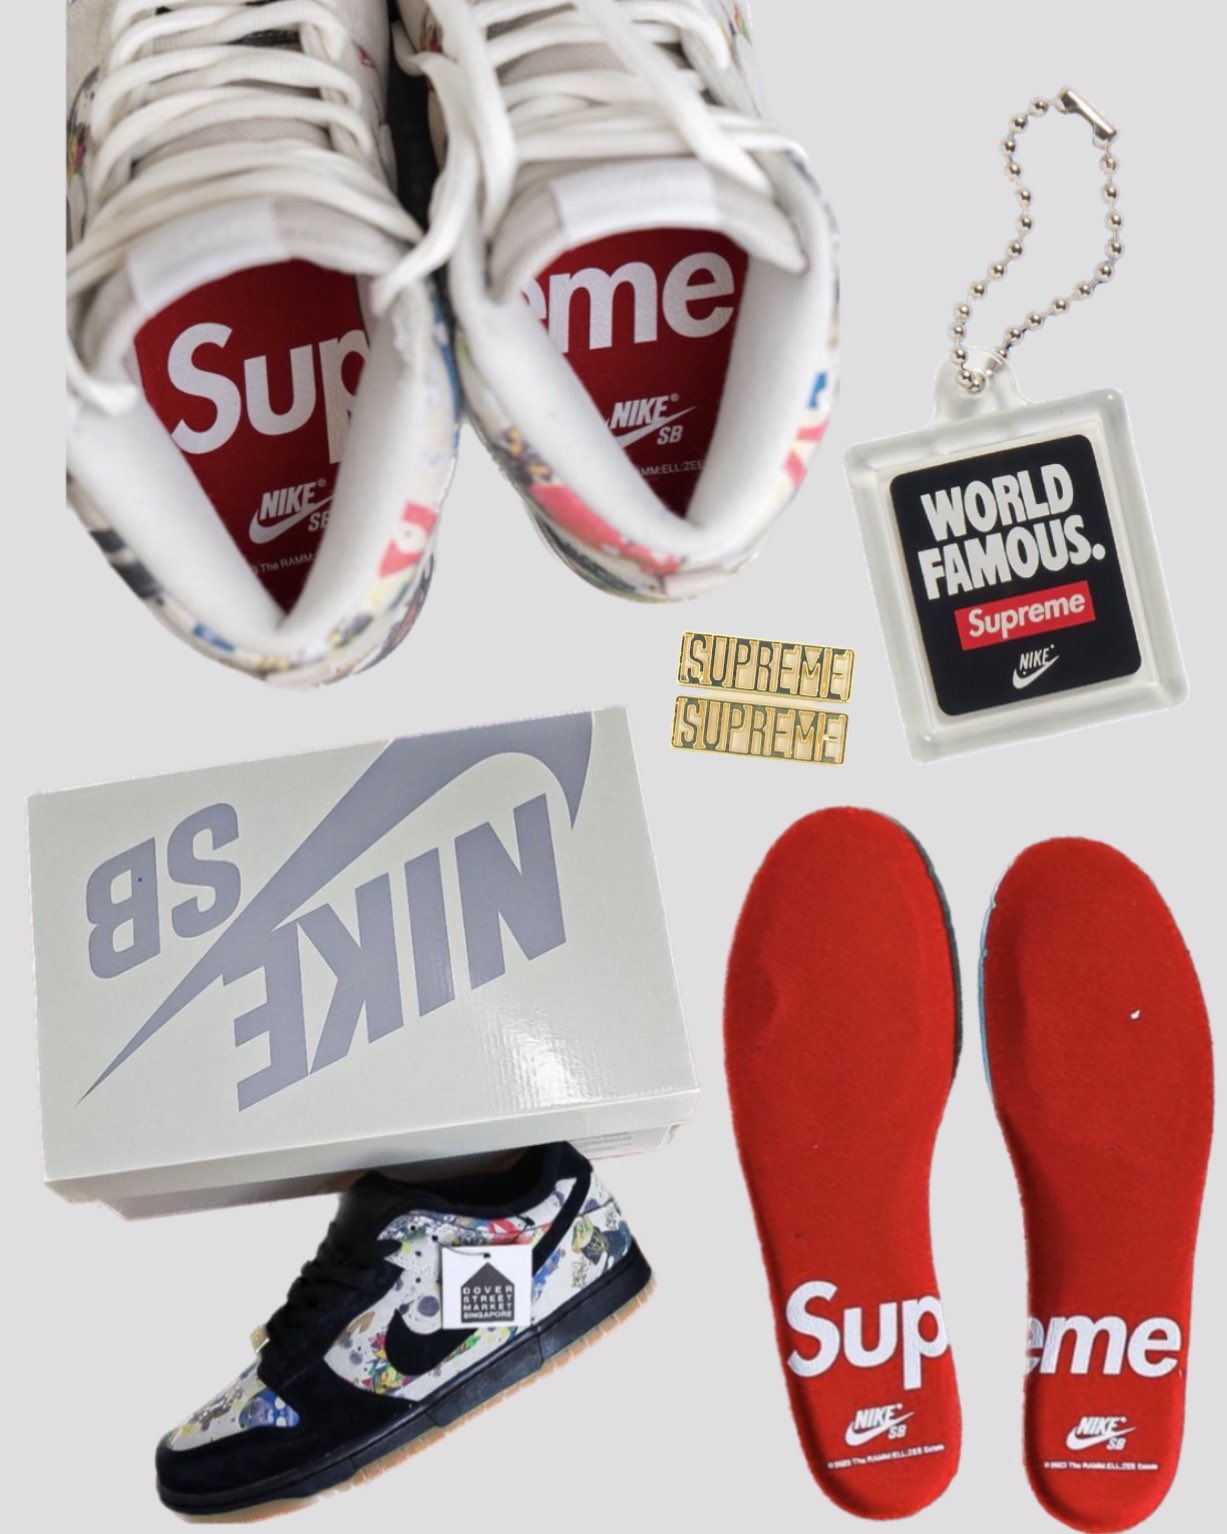 Supreme Drops on X: Which one of the Supreme x Nike SB Dunks are going for  tomorrow? Give a little ❤️ to this post for good luck and let me know below